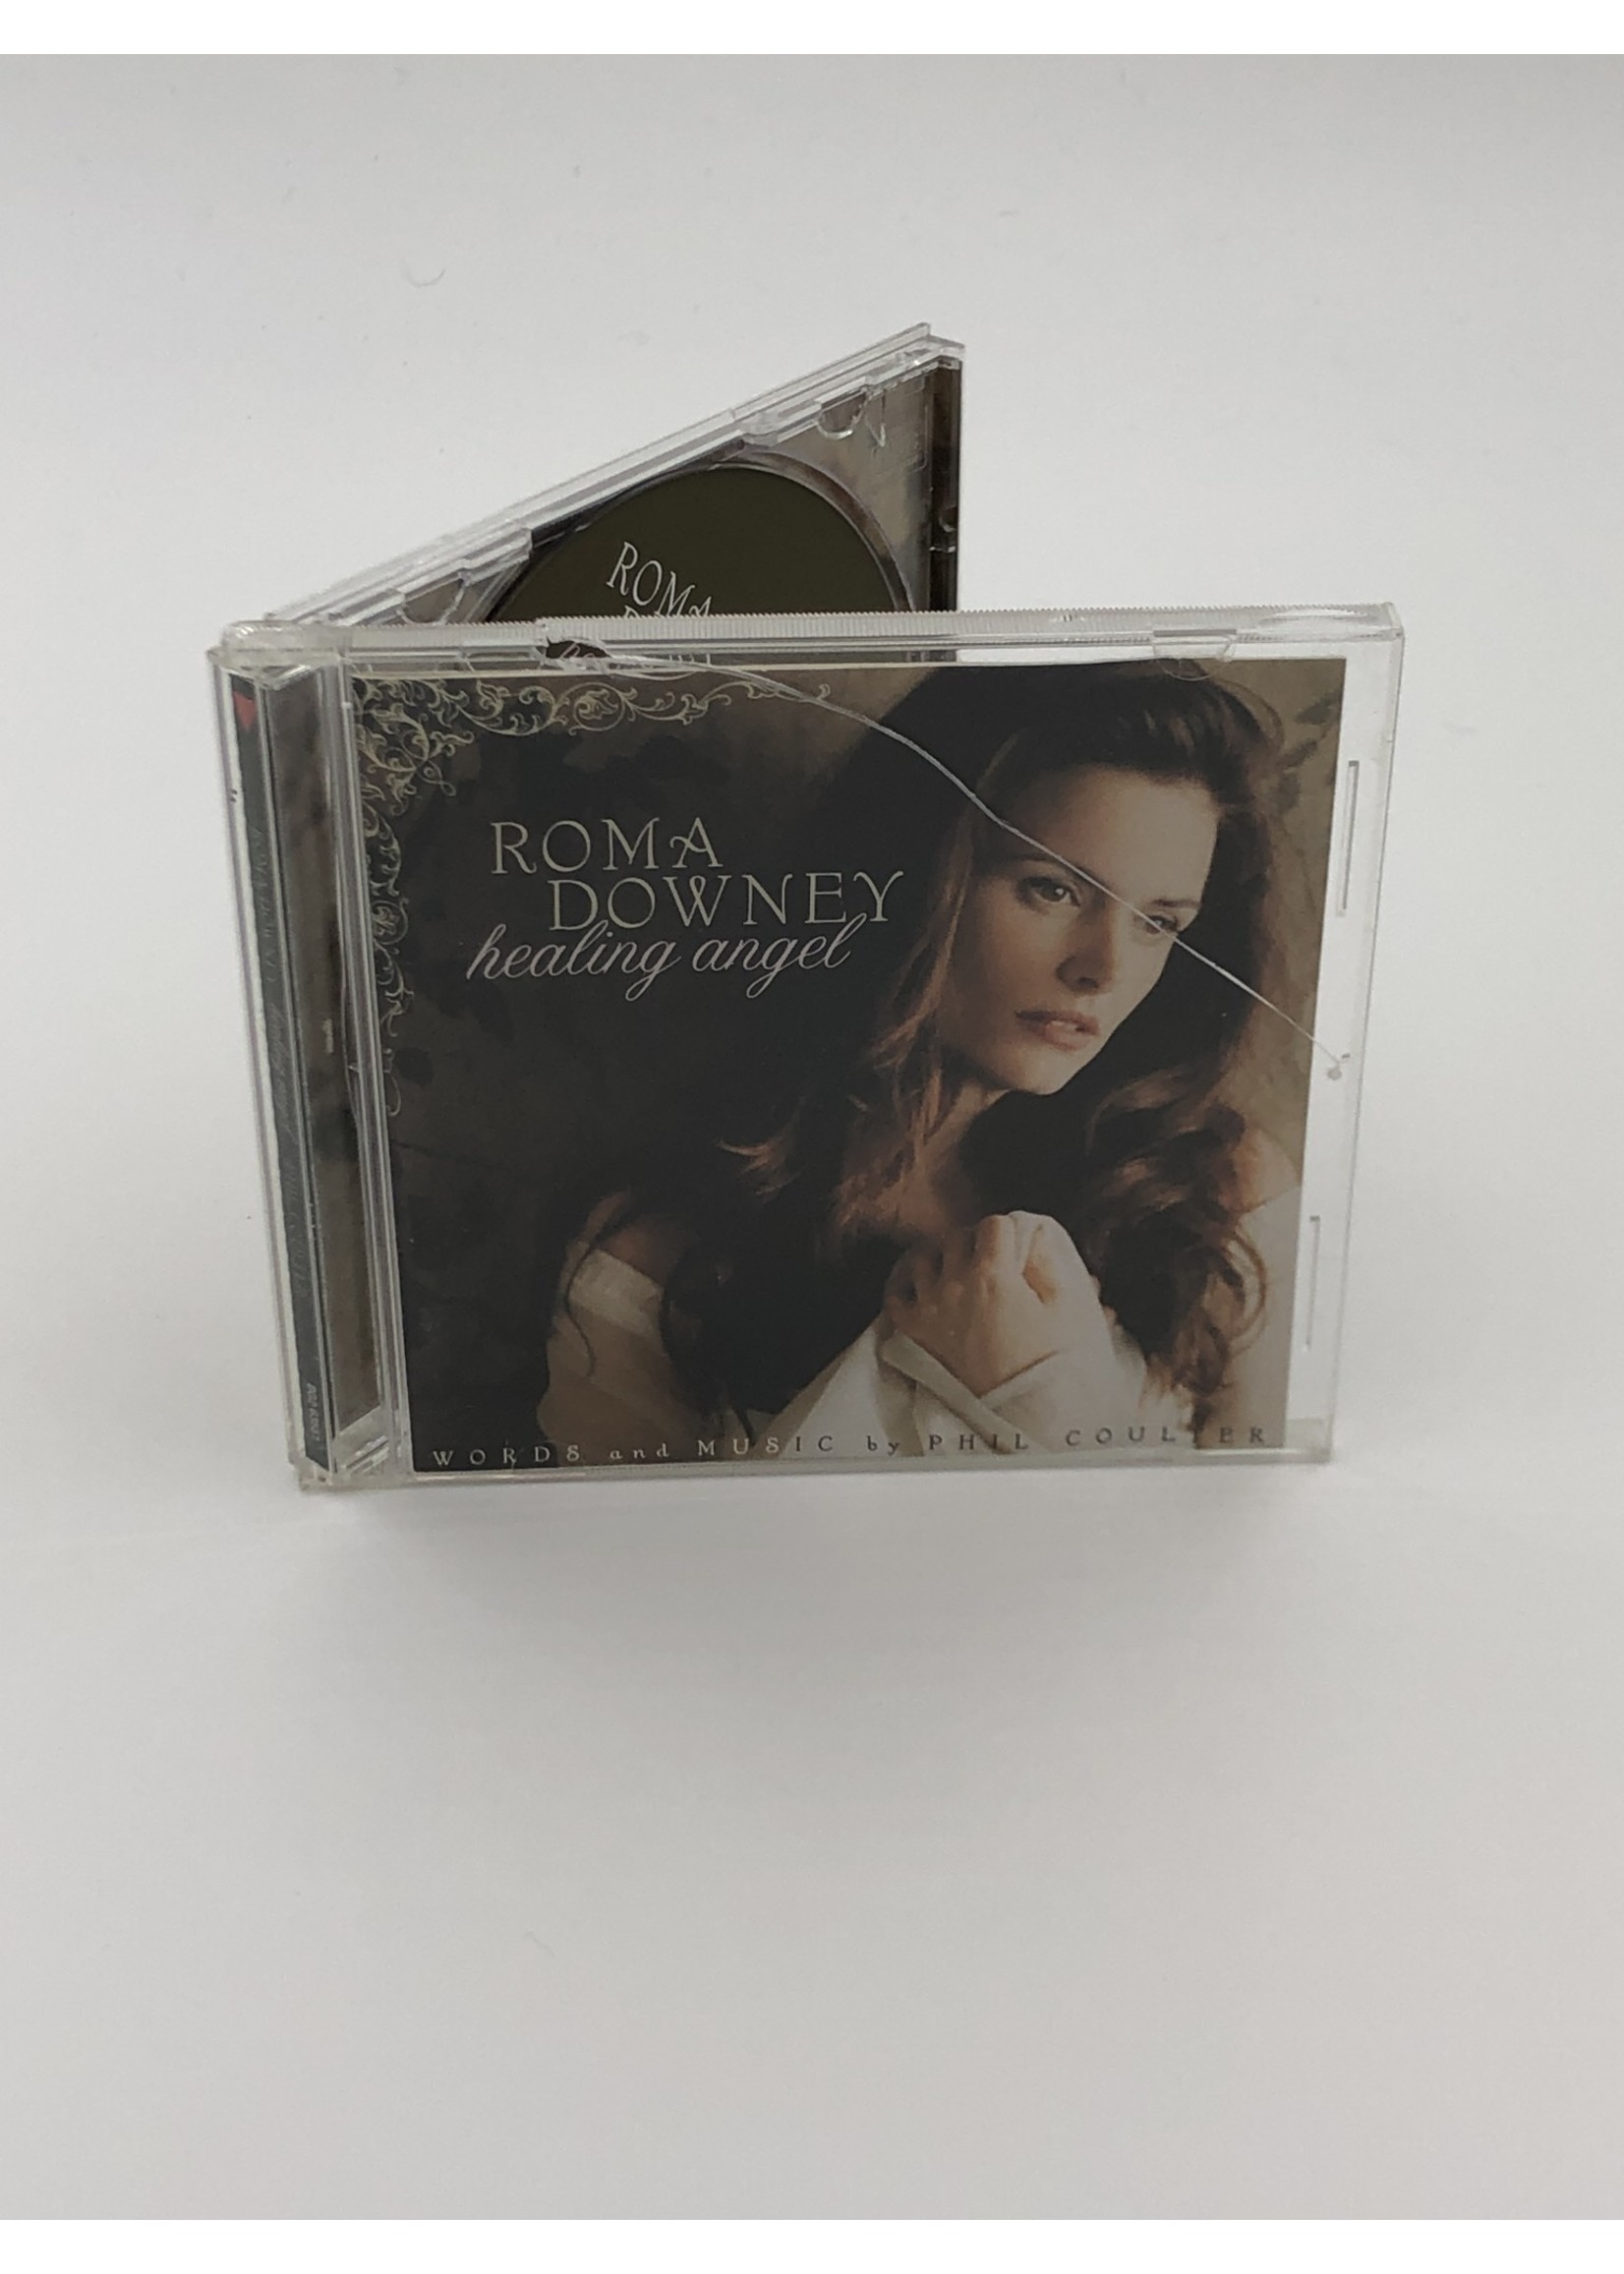 CD Roma Downey: Healing Angel: Words and Music sung by Phil Coulter CD